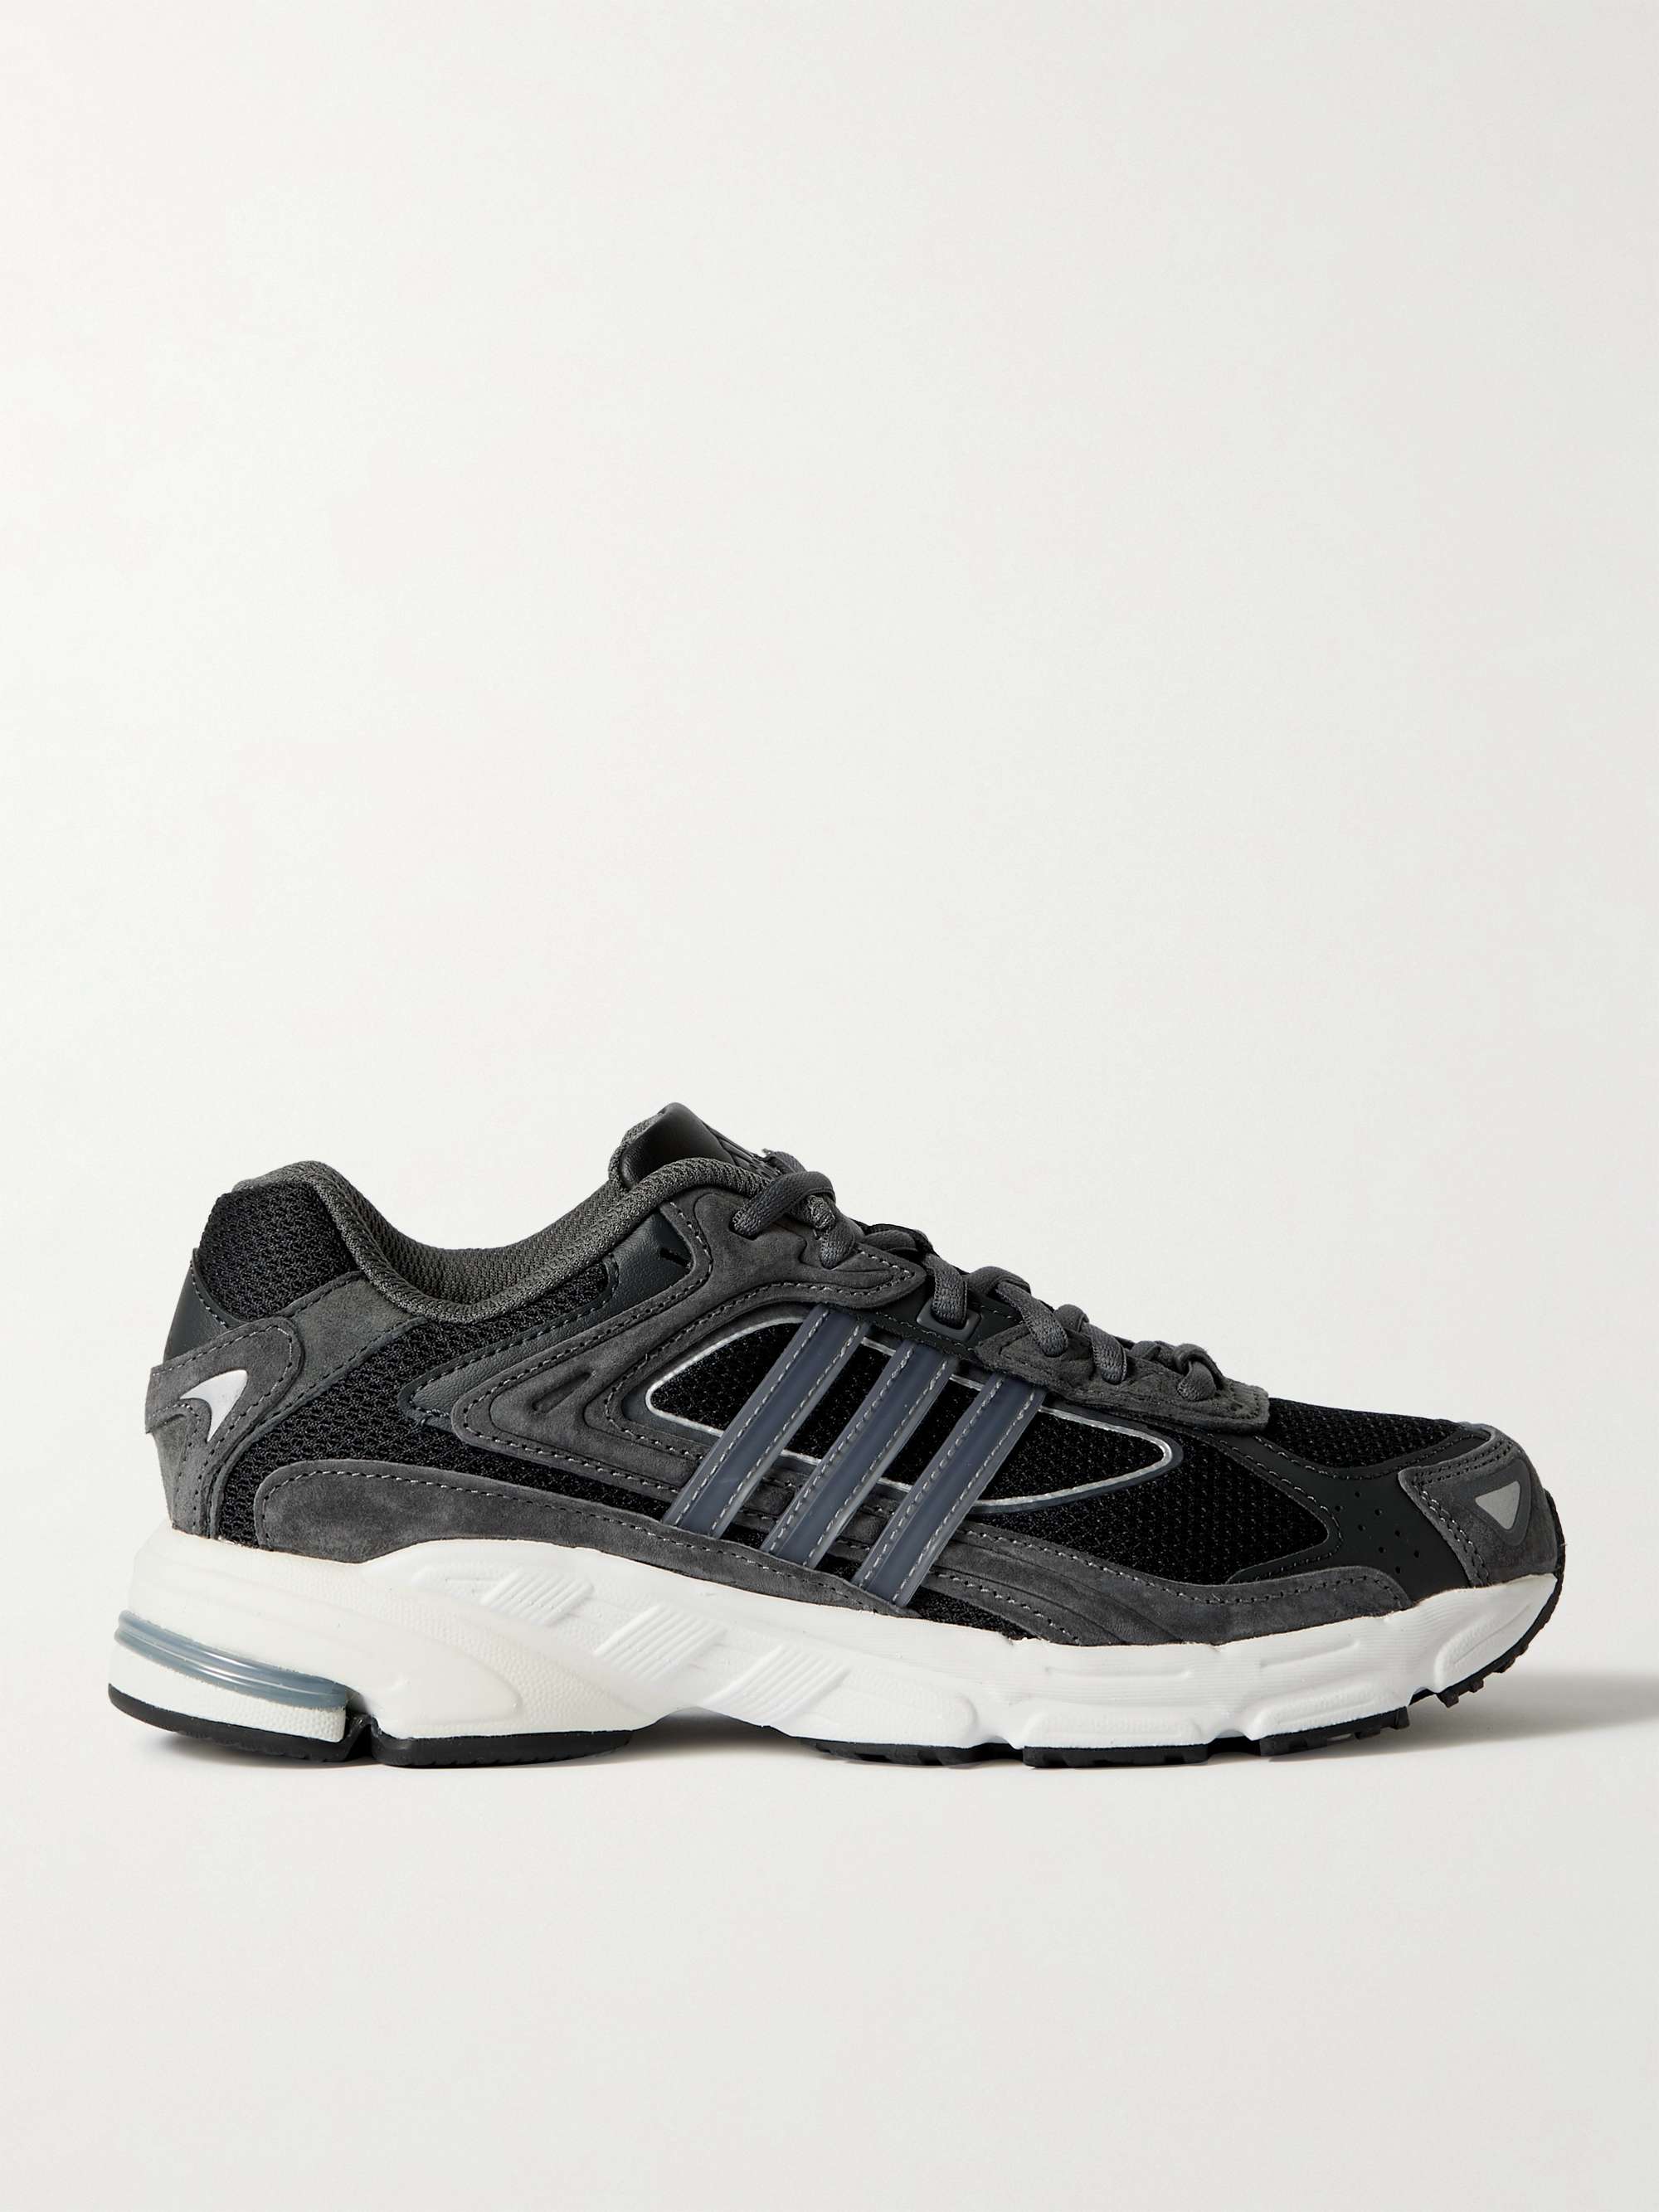 ADIDAS ORIGINALS Response CL Rubber-Trimmed Mesh, Suede and Leather Sneakers  | MR PORTER